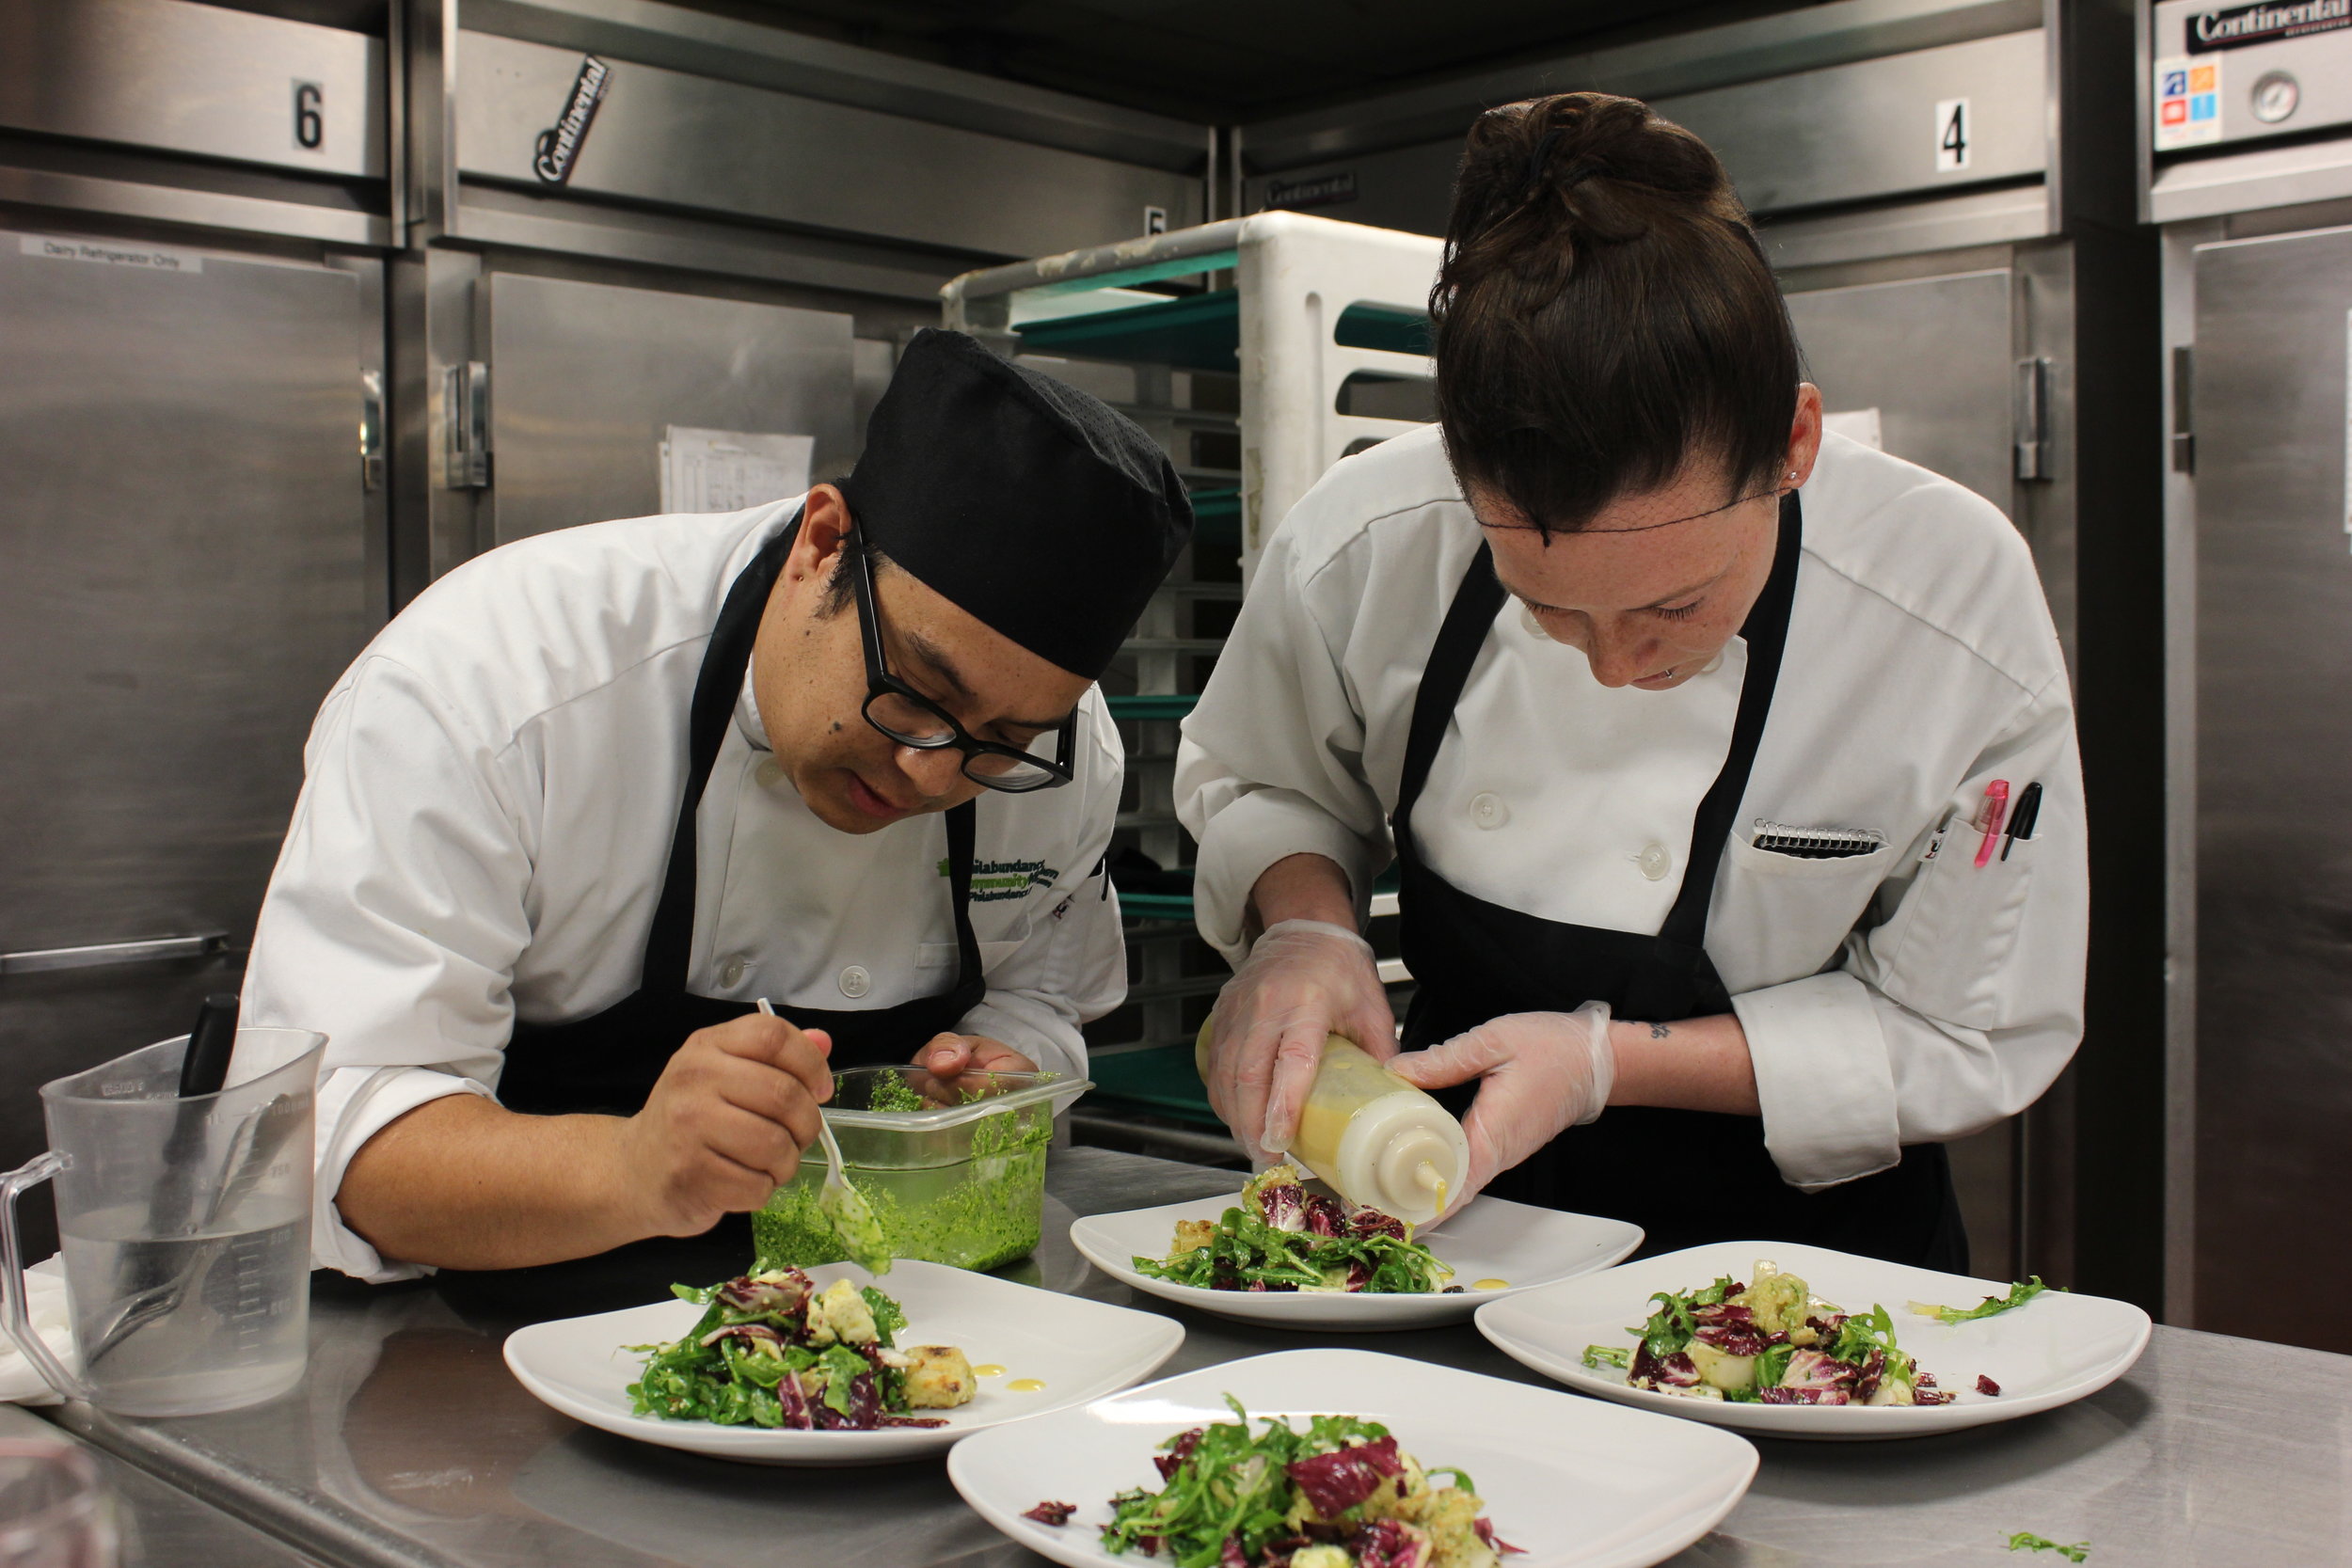 Alt text: two chefs in white jackets and black aprons lean over plates of salad while placing green dressing and vinegar onto them.